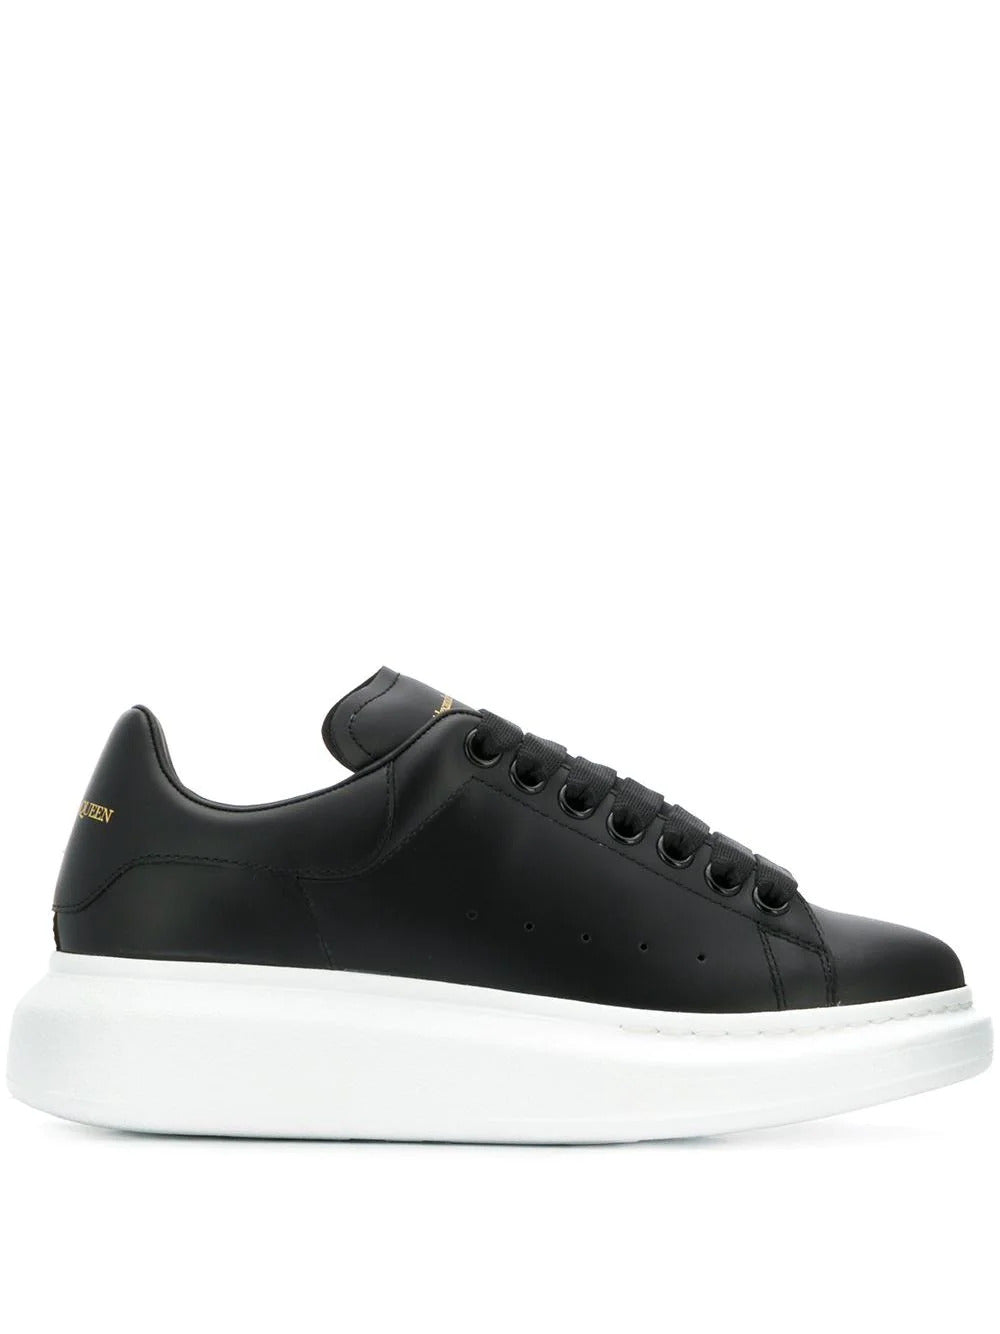 Black/black leather/suede oversized low-top sneakers